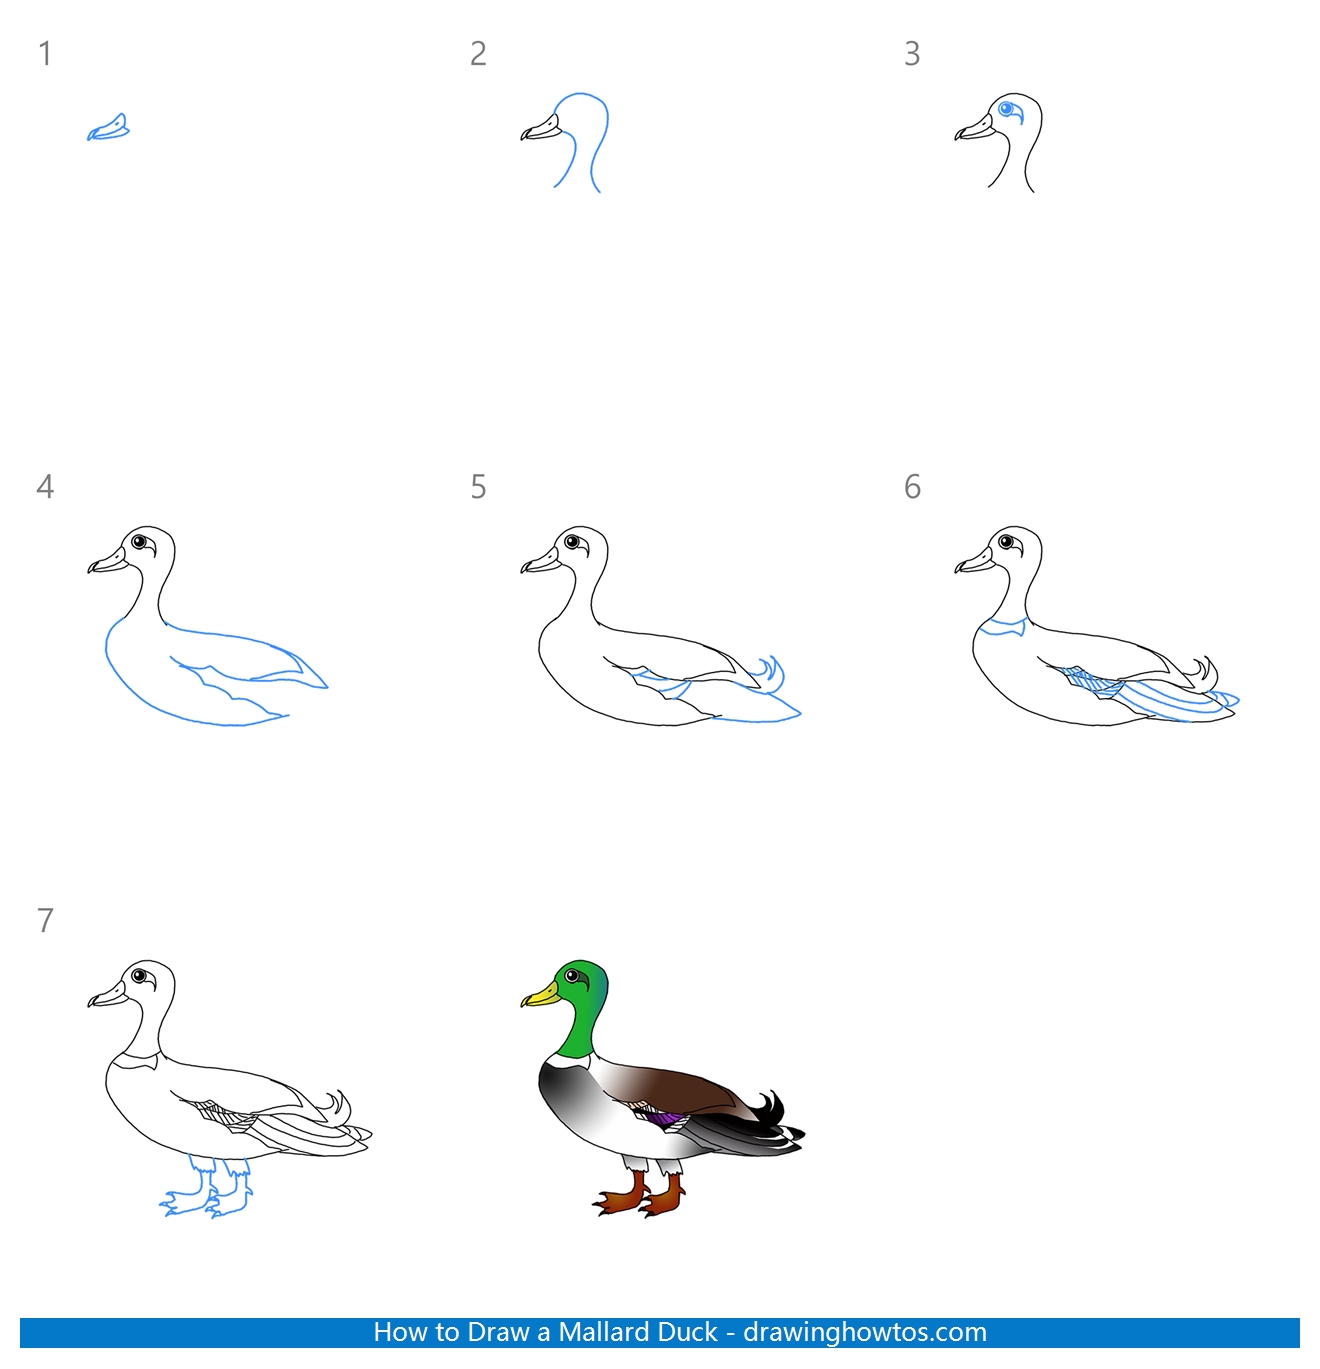 How to Draw a Mallard Duck Step by Step